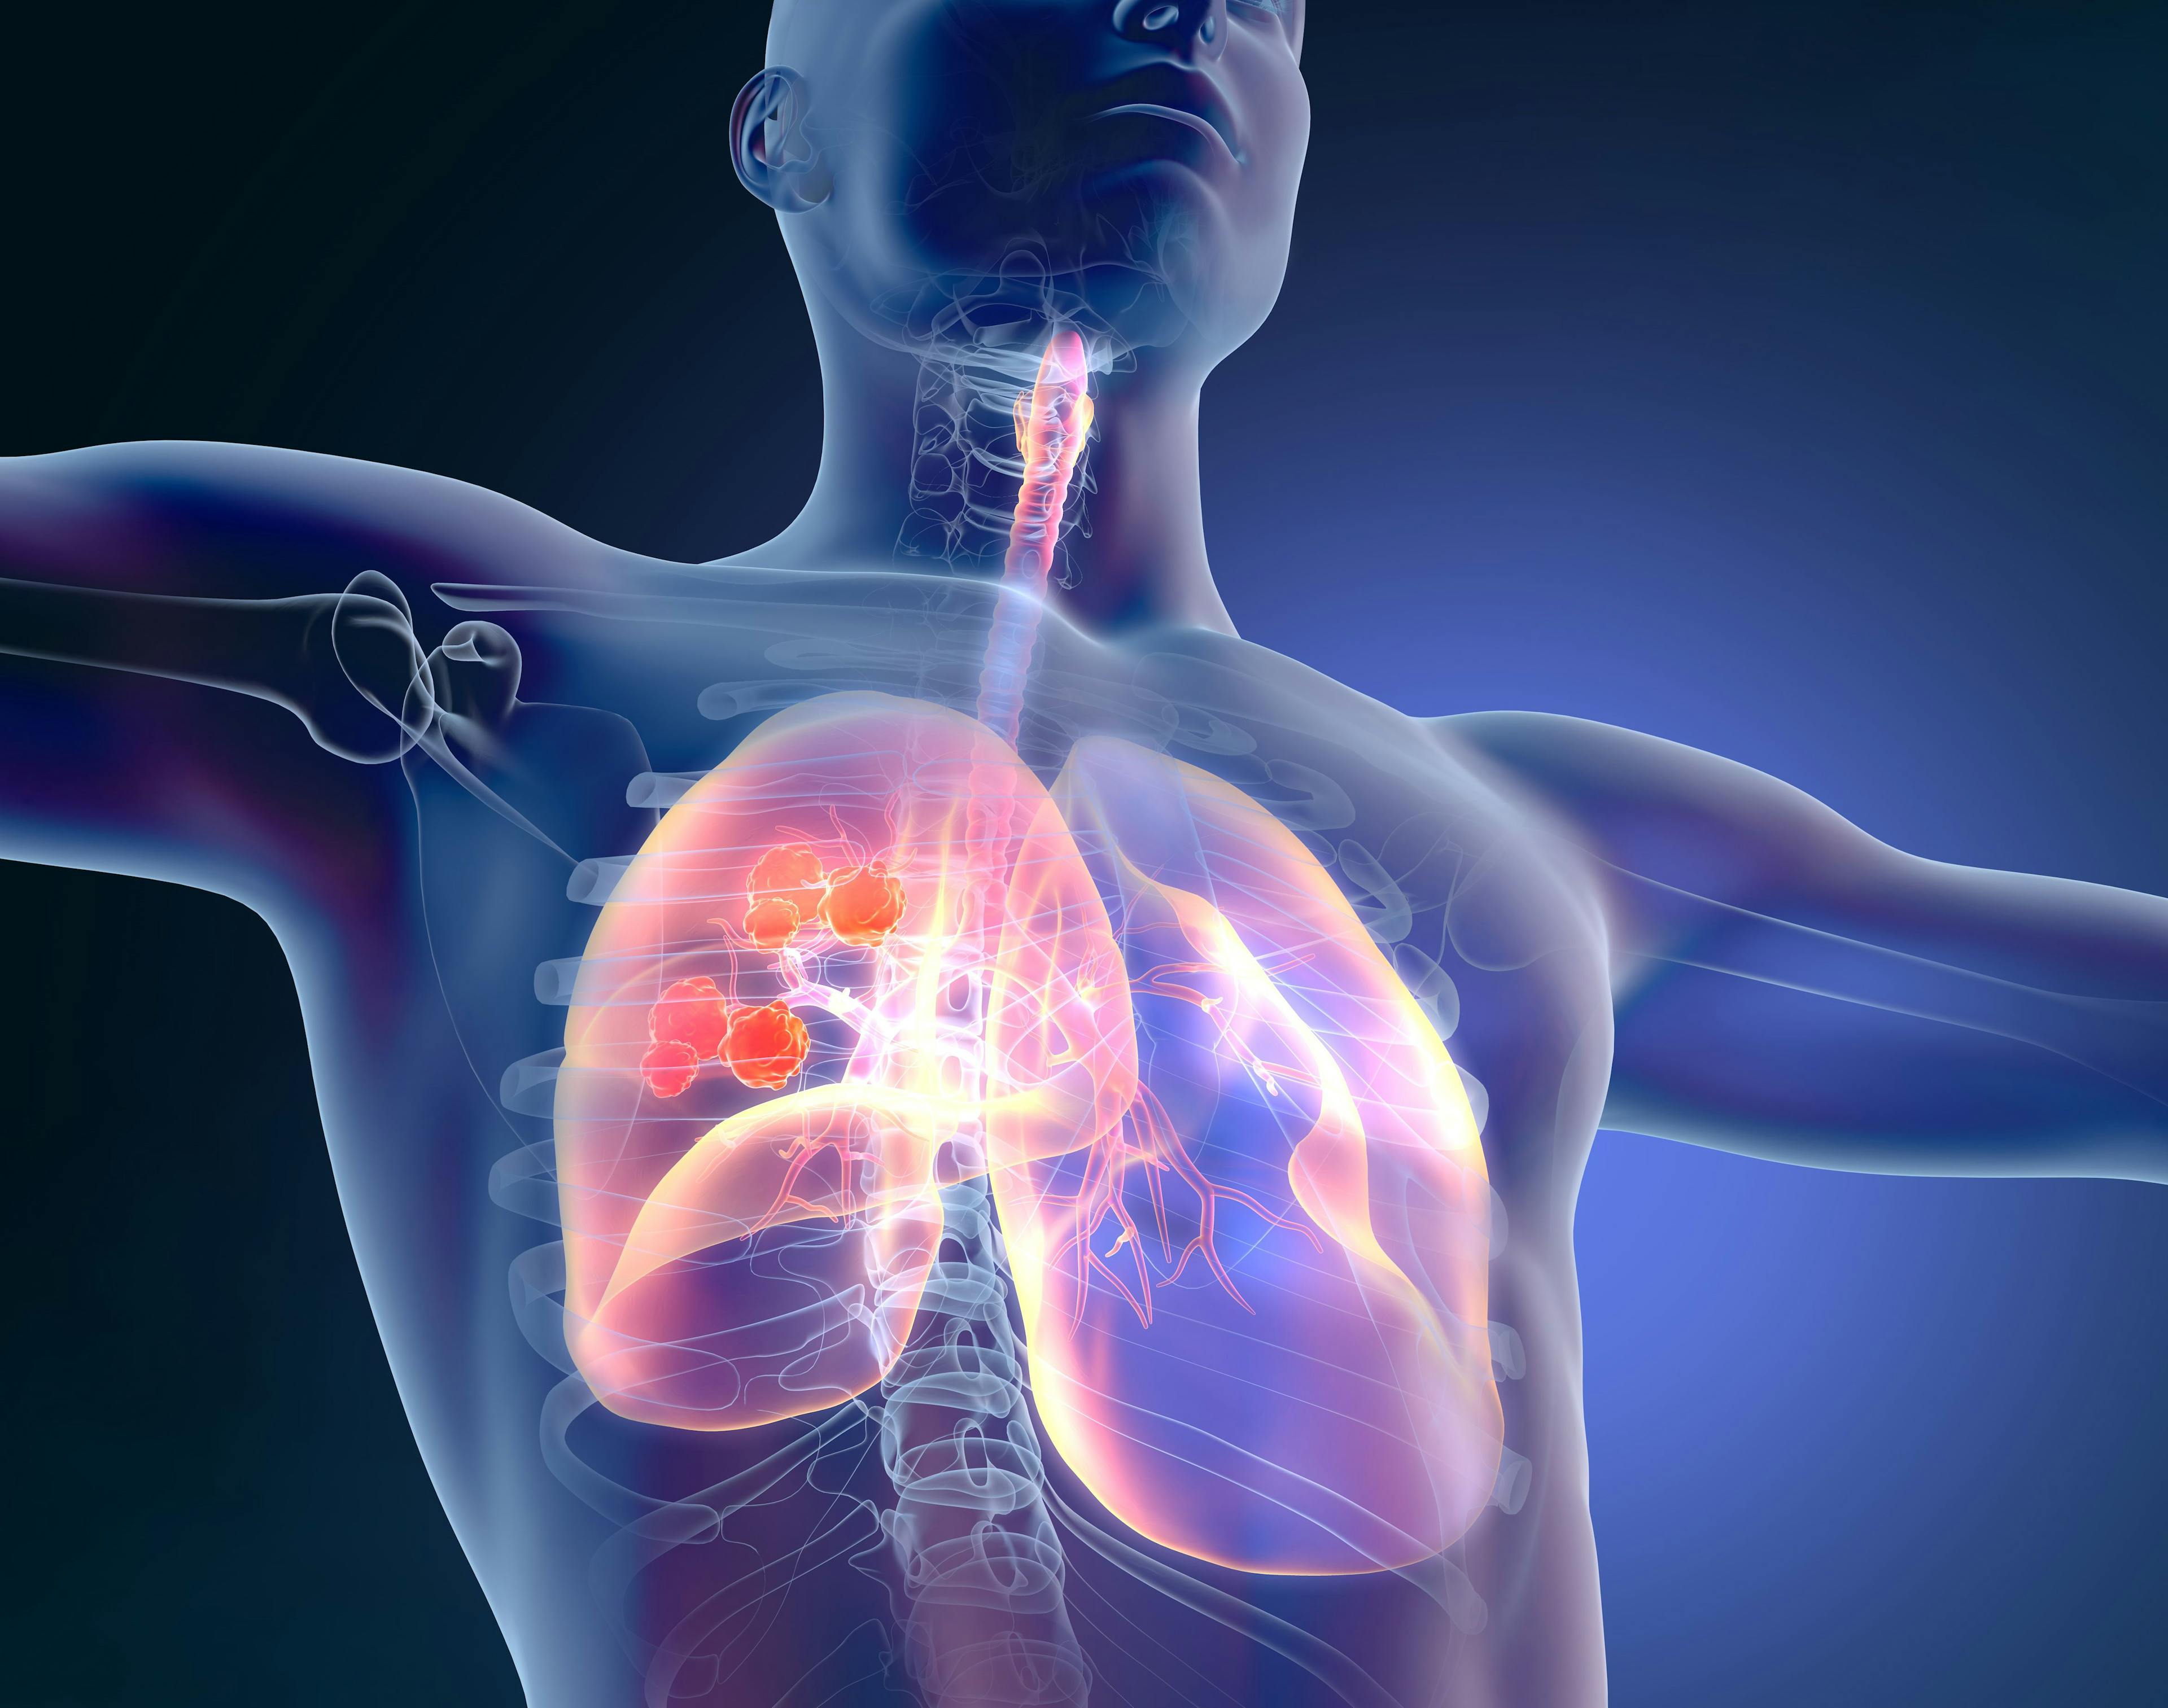 Preoperative CT Features May Help Select Patients With Stage IA NSCLC for Sublobar Resection